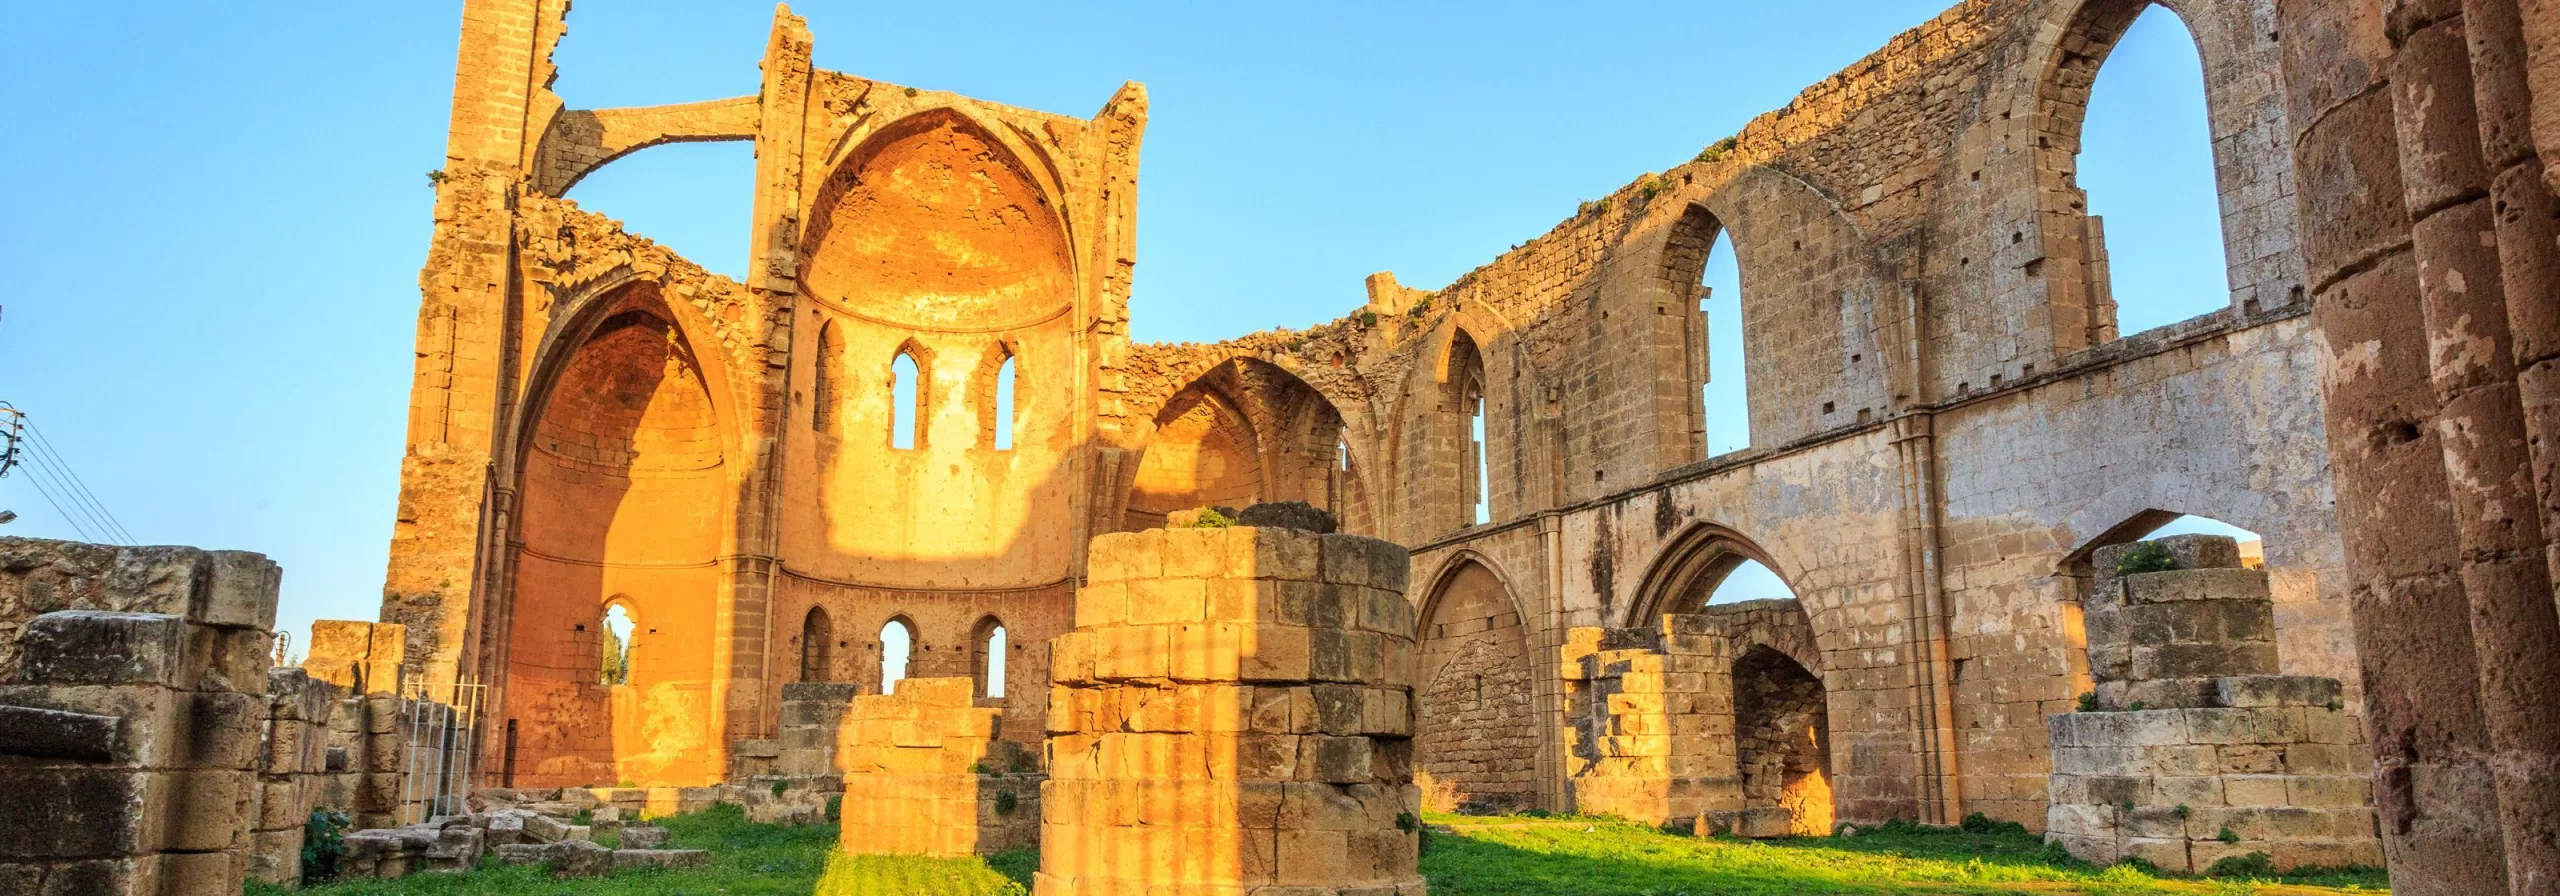 Top attractions in Famagusta, Northern Cyprus